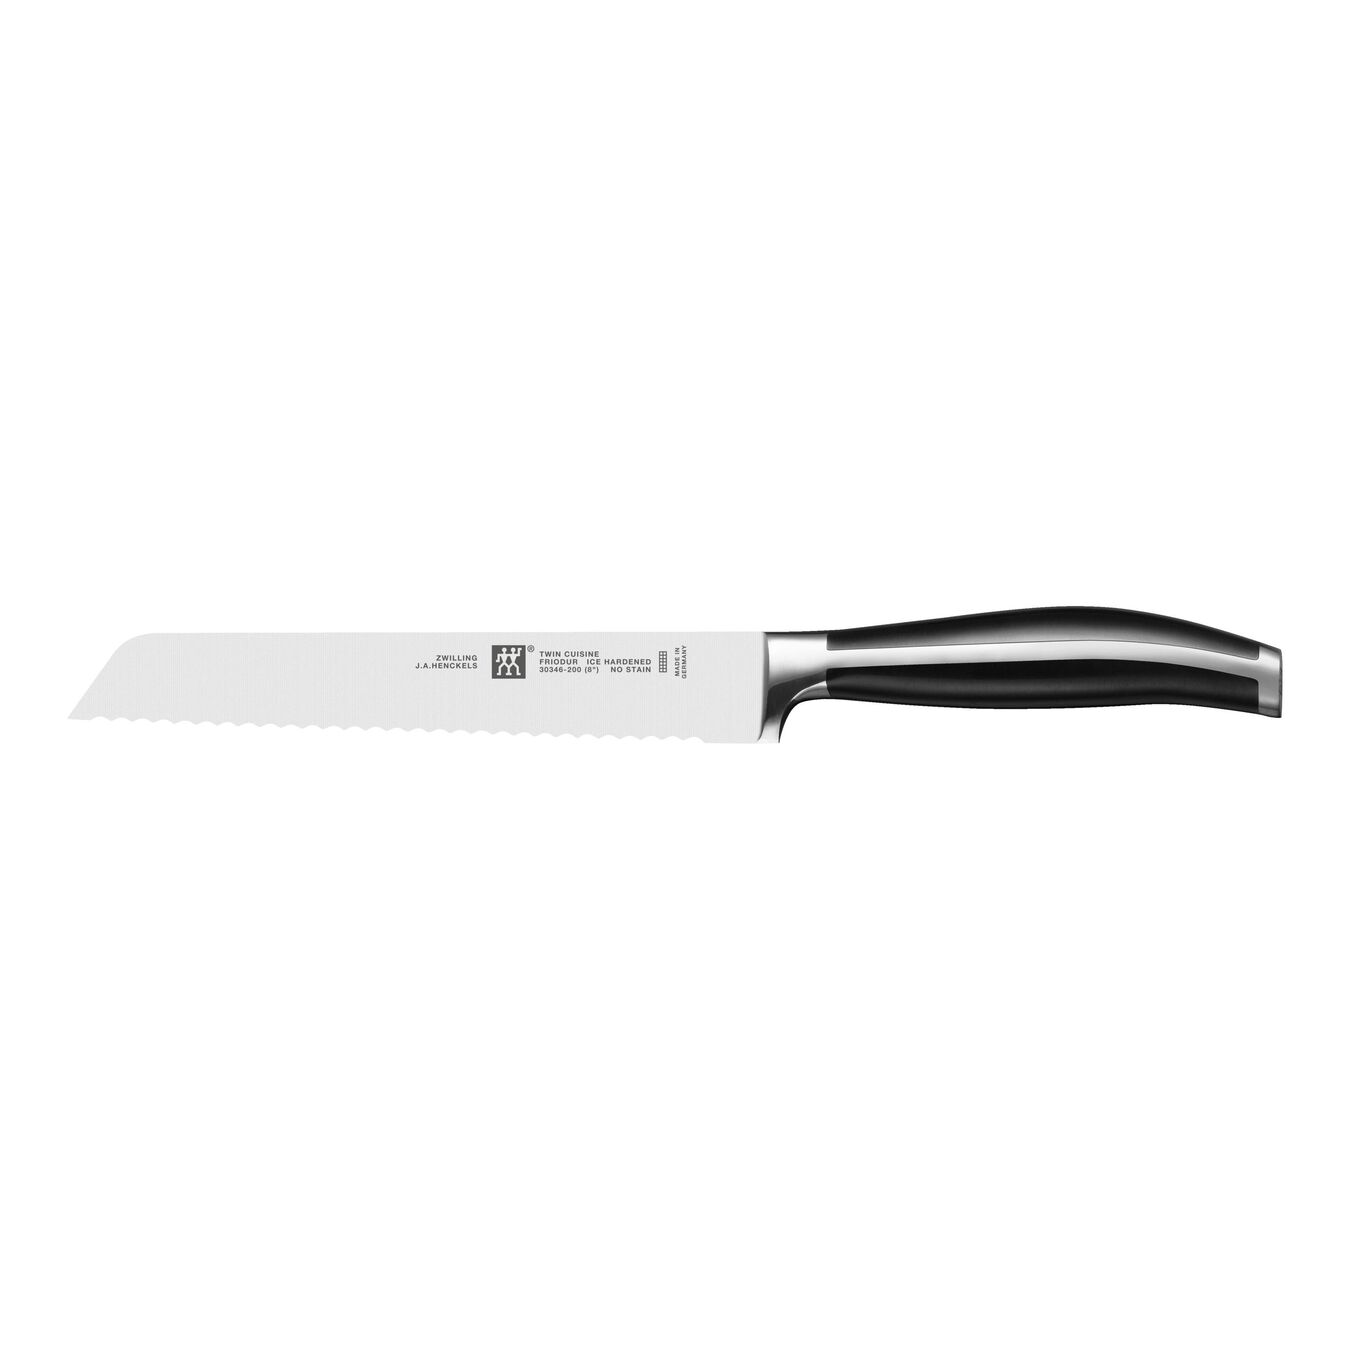 8 inch Bread knife - Visual Imperfections,,large 1